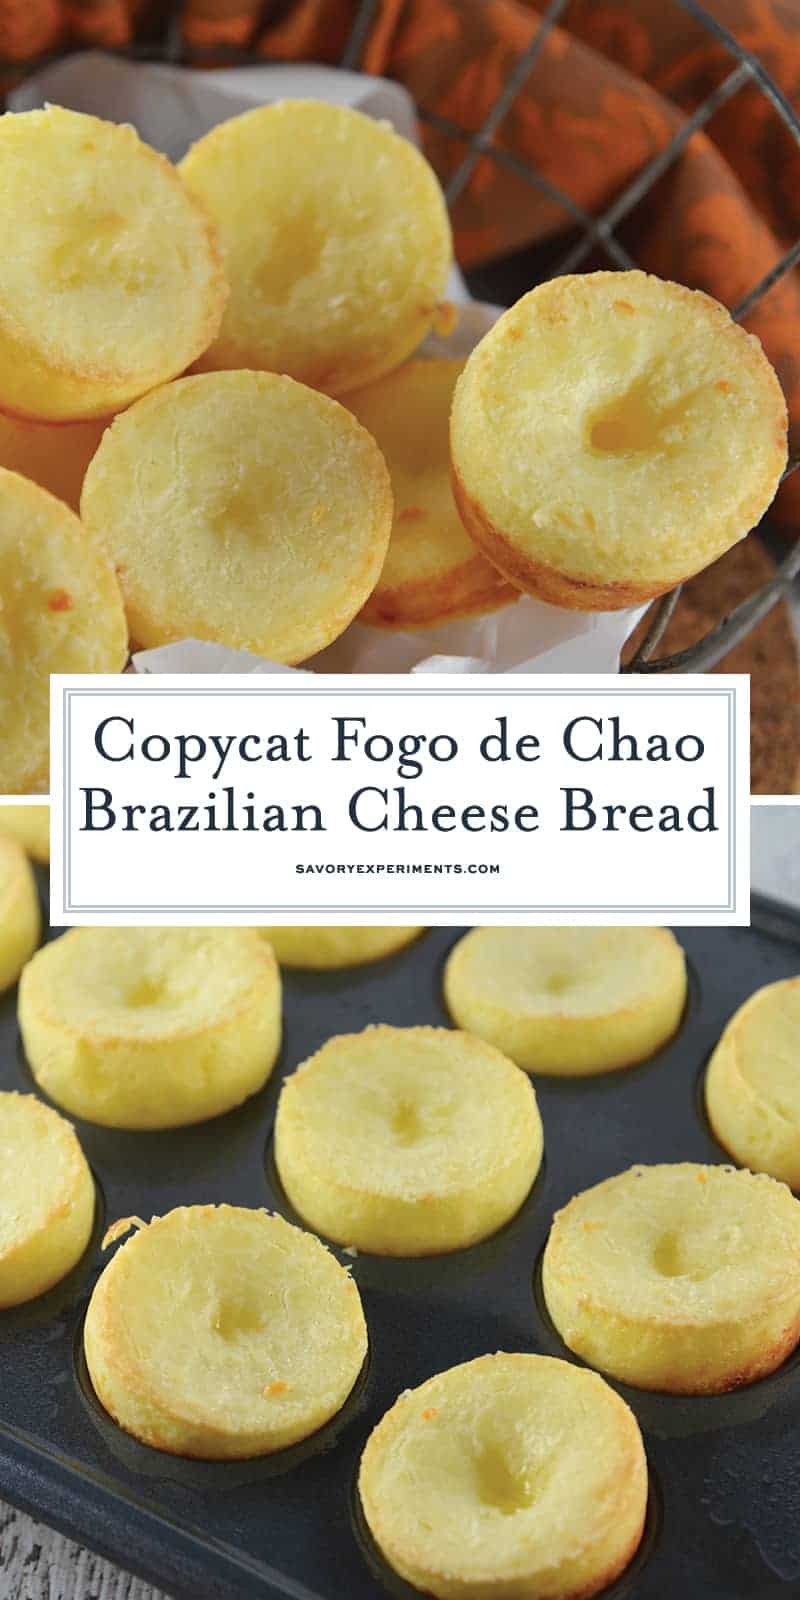 Fogo de Chao Rolls, also known as Brazilian cheese puff bread, are easier to make at home than you think. This gluten-free bread is also yeast free and only takes 30 minutes!  #fogodechaorolls #braziliancheesebread www.savoryexperiments.com